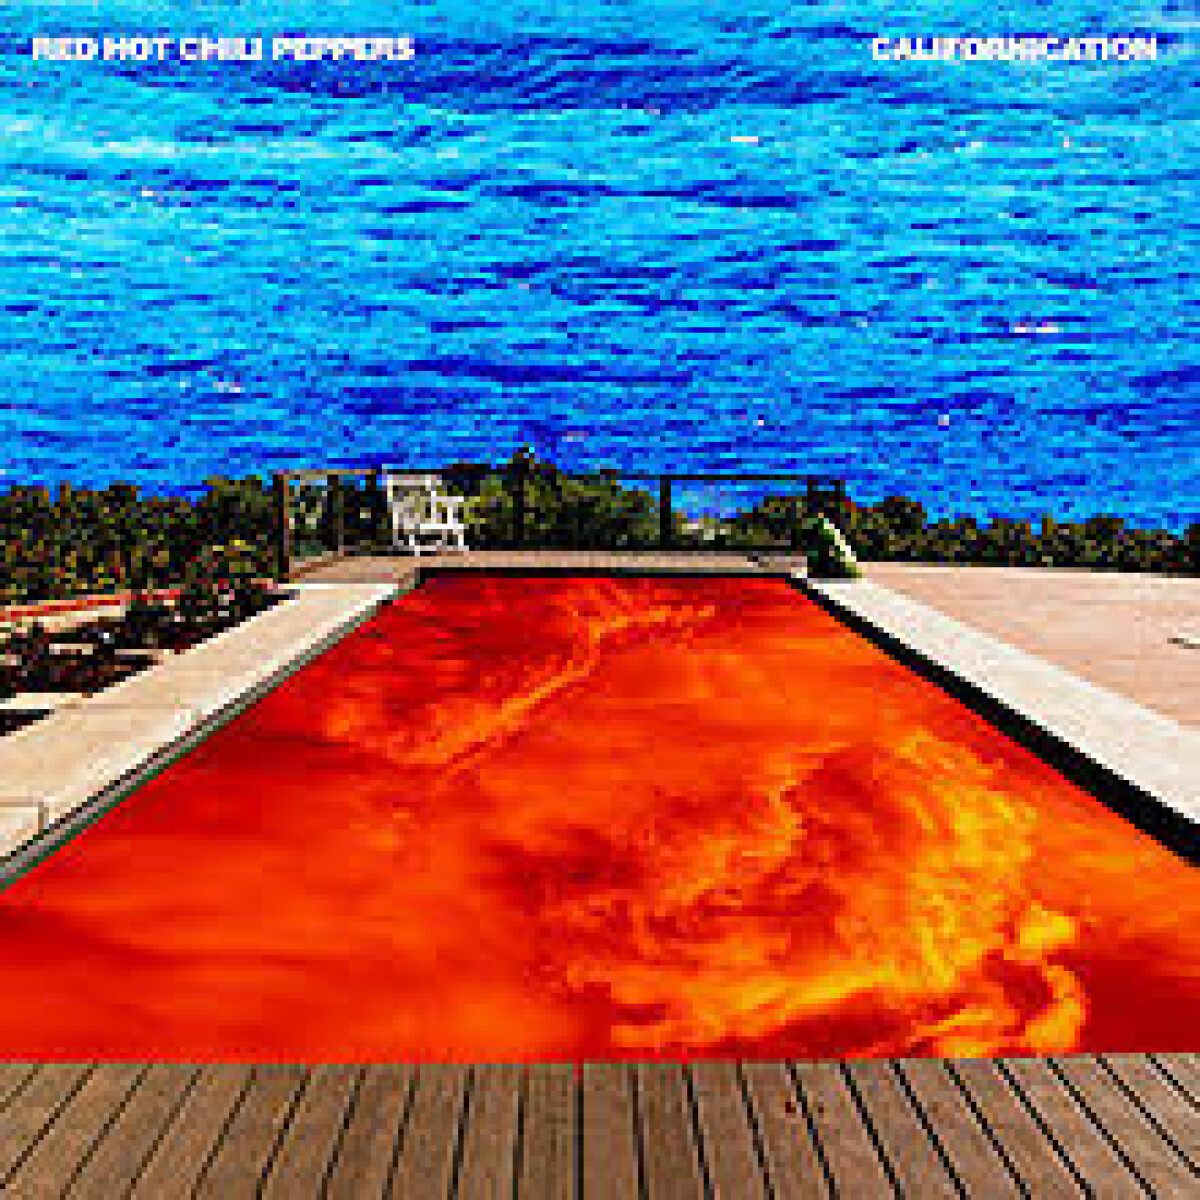 Red Hot Chili Peppers Californication - Vinilo 